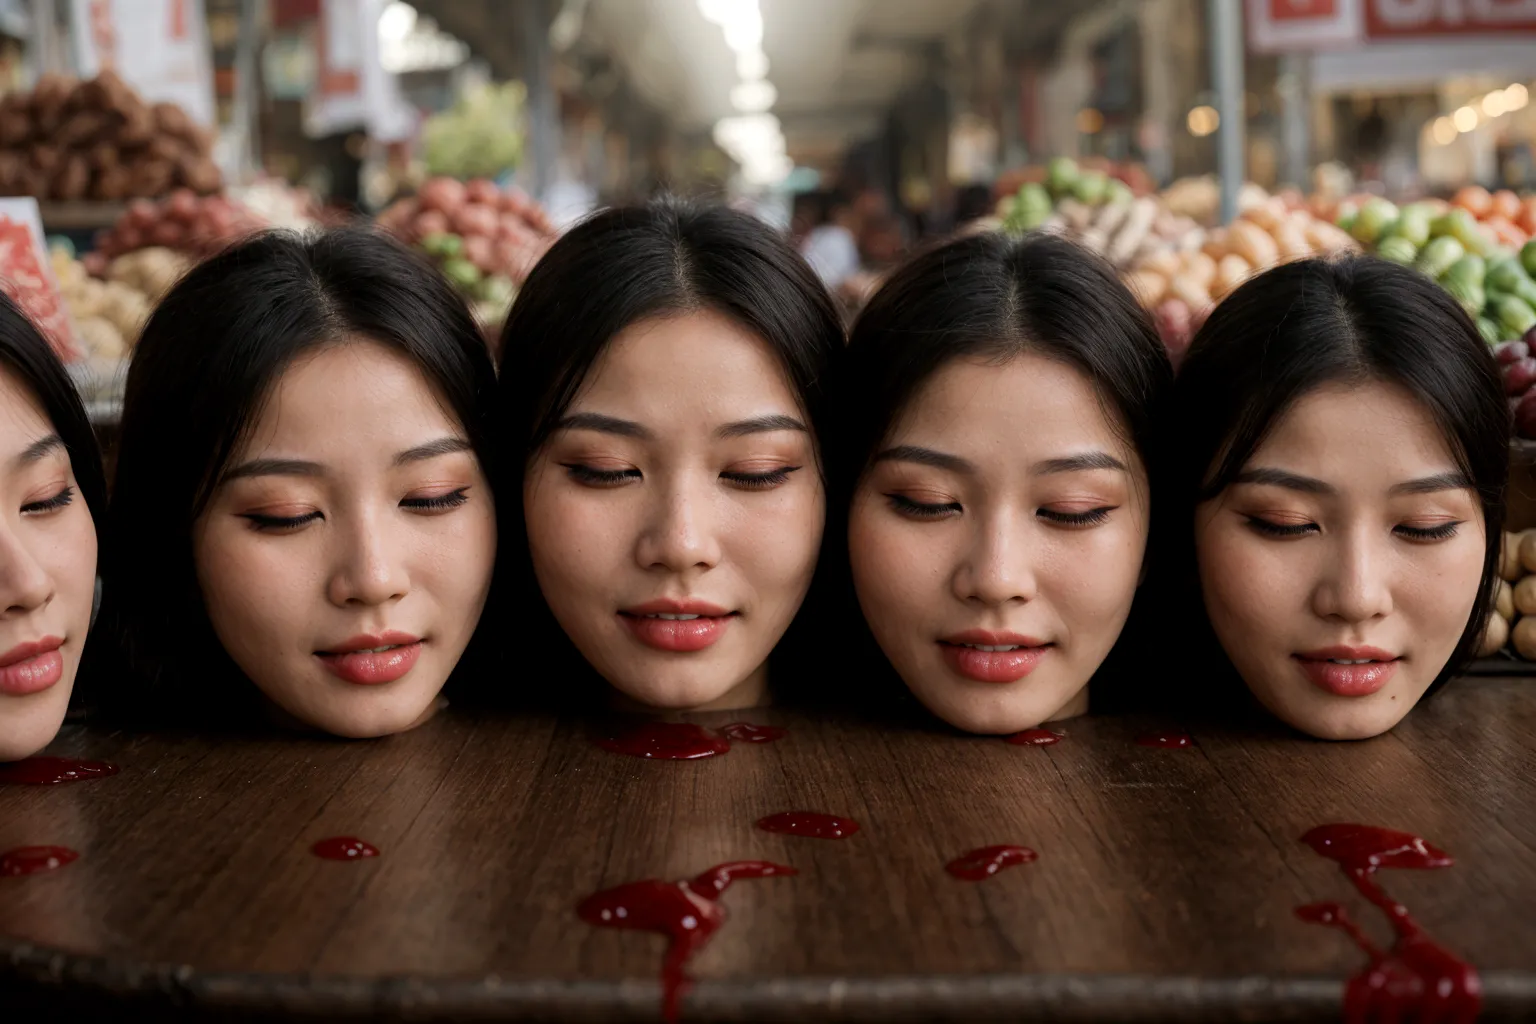 Several decapitated heads of beautiful women, on a table, in a public market, full of blood, blood flowing, ((eyes closed)), ble...